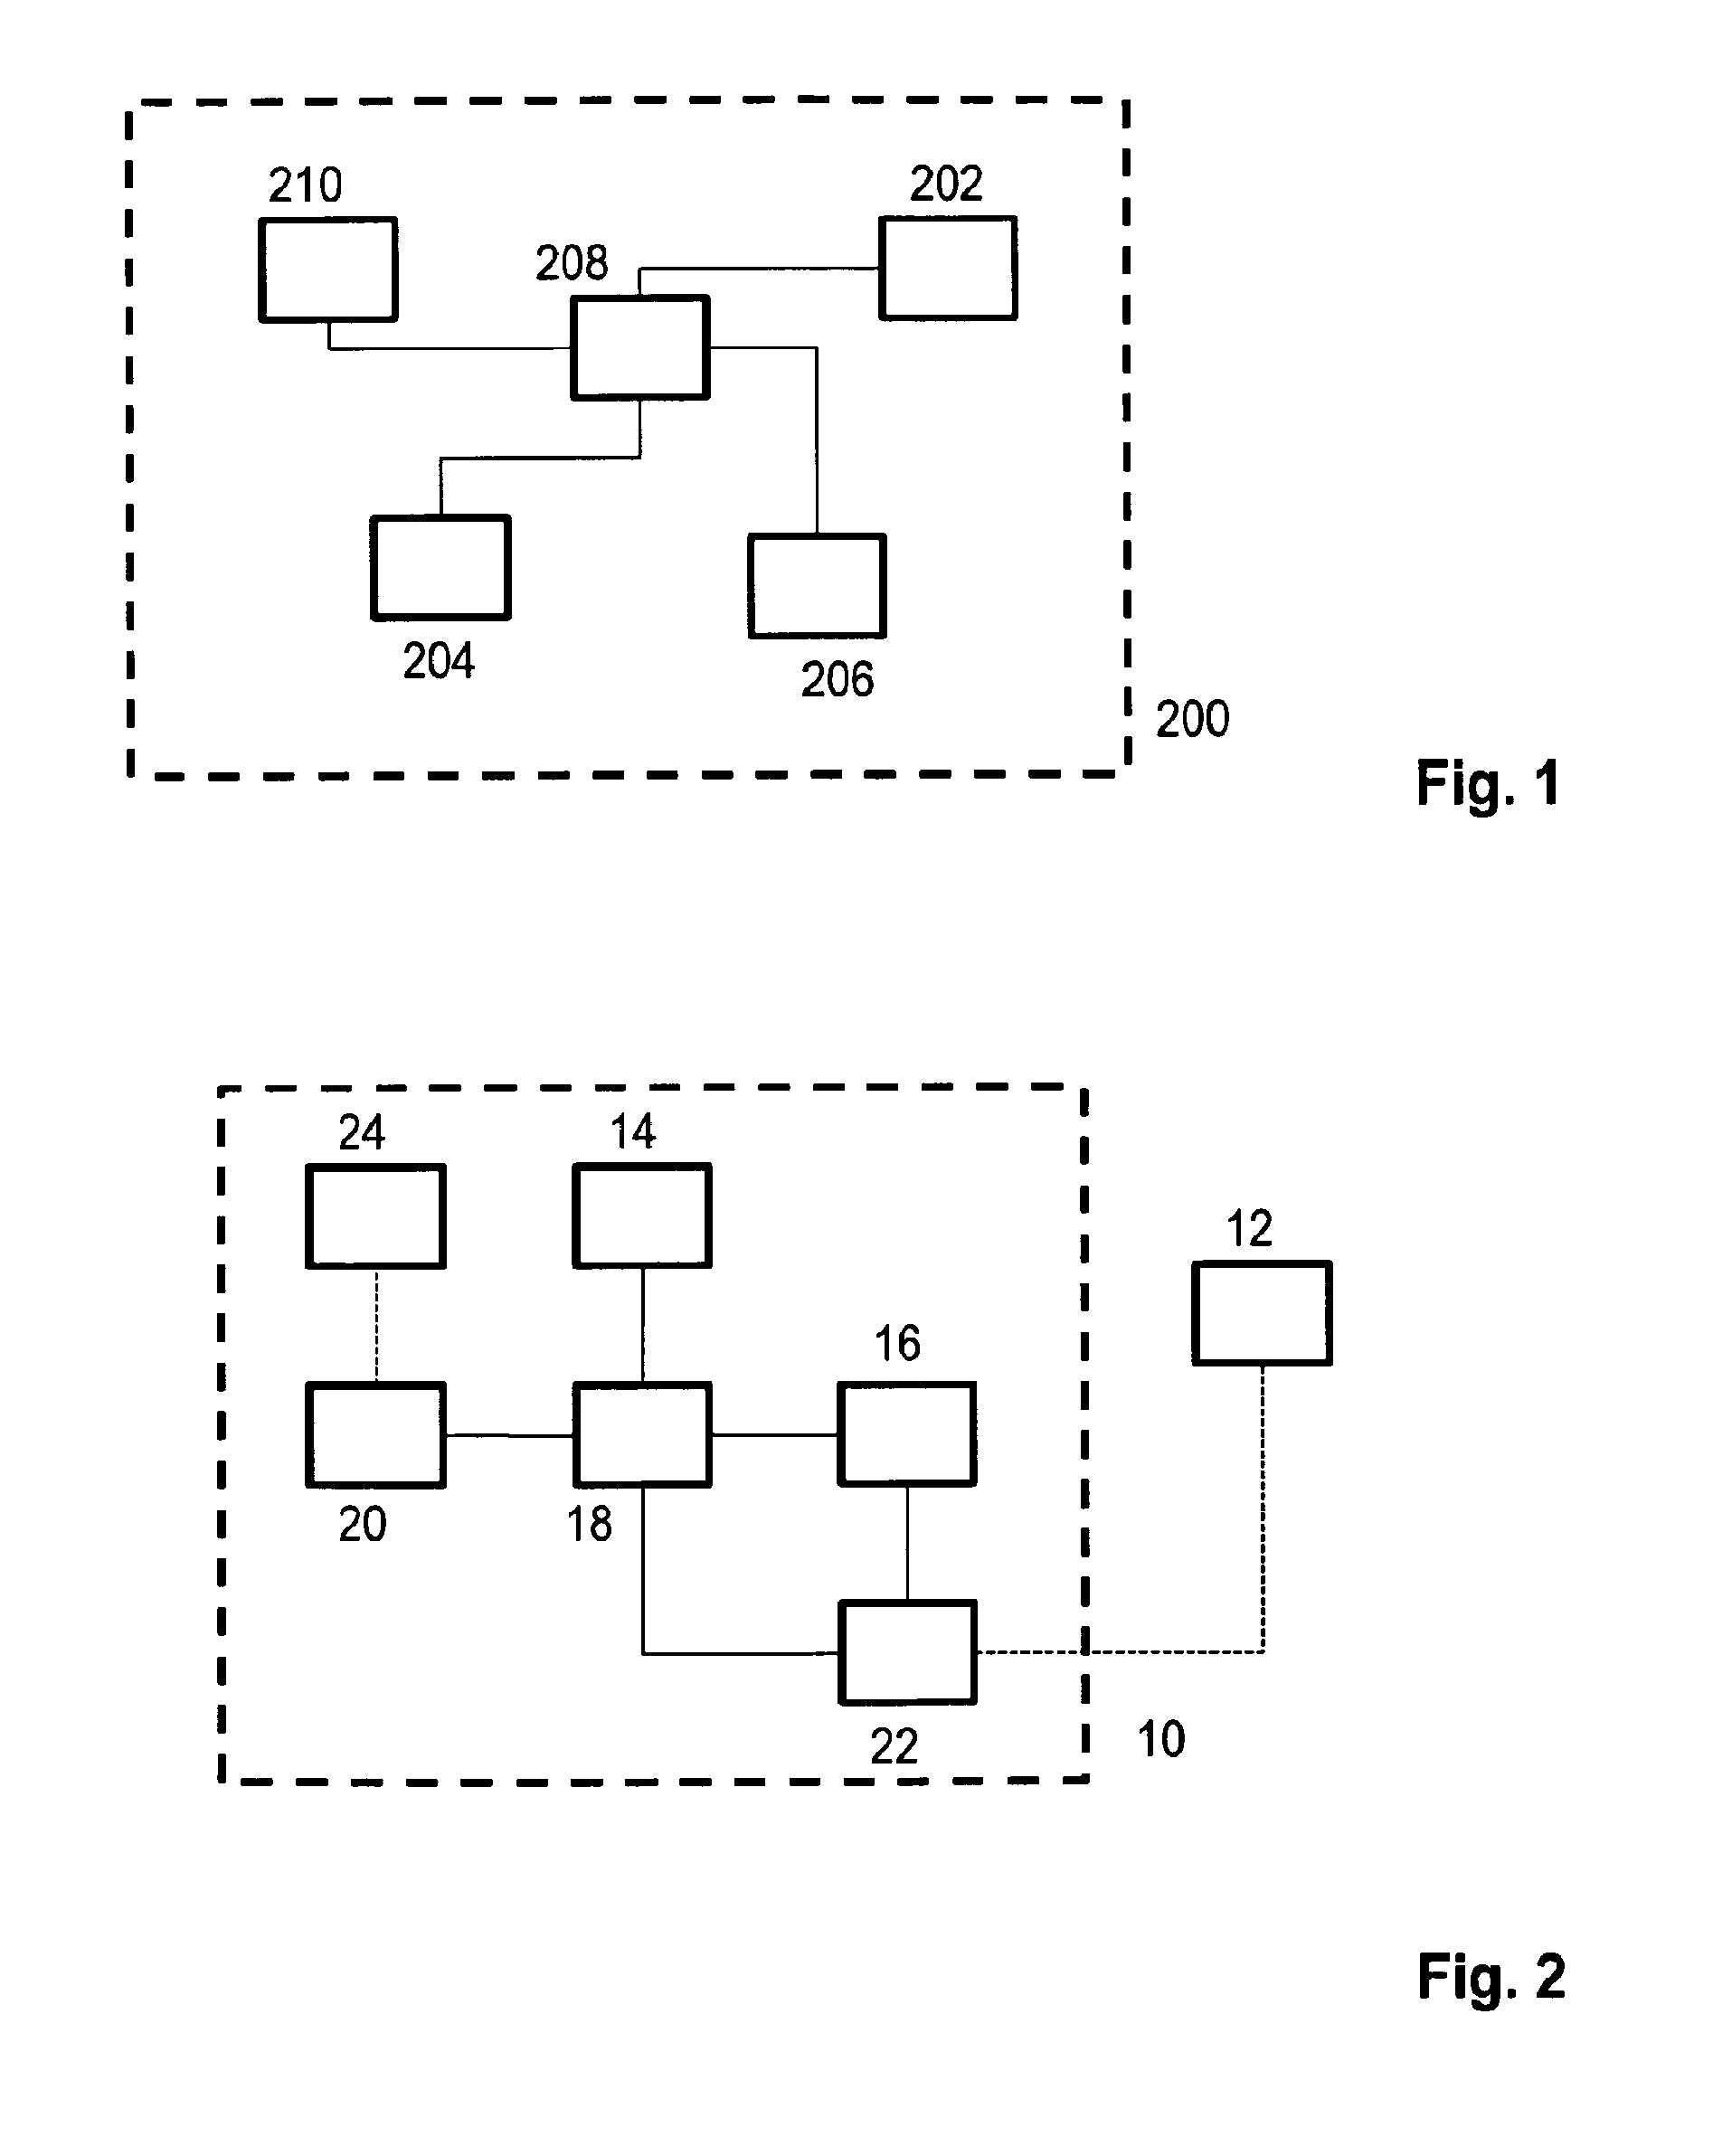 System and method for performing partial evaluation in order to construct a simplified policy